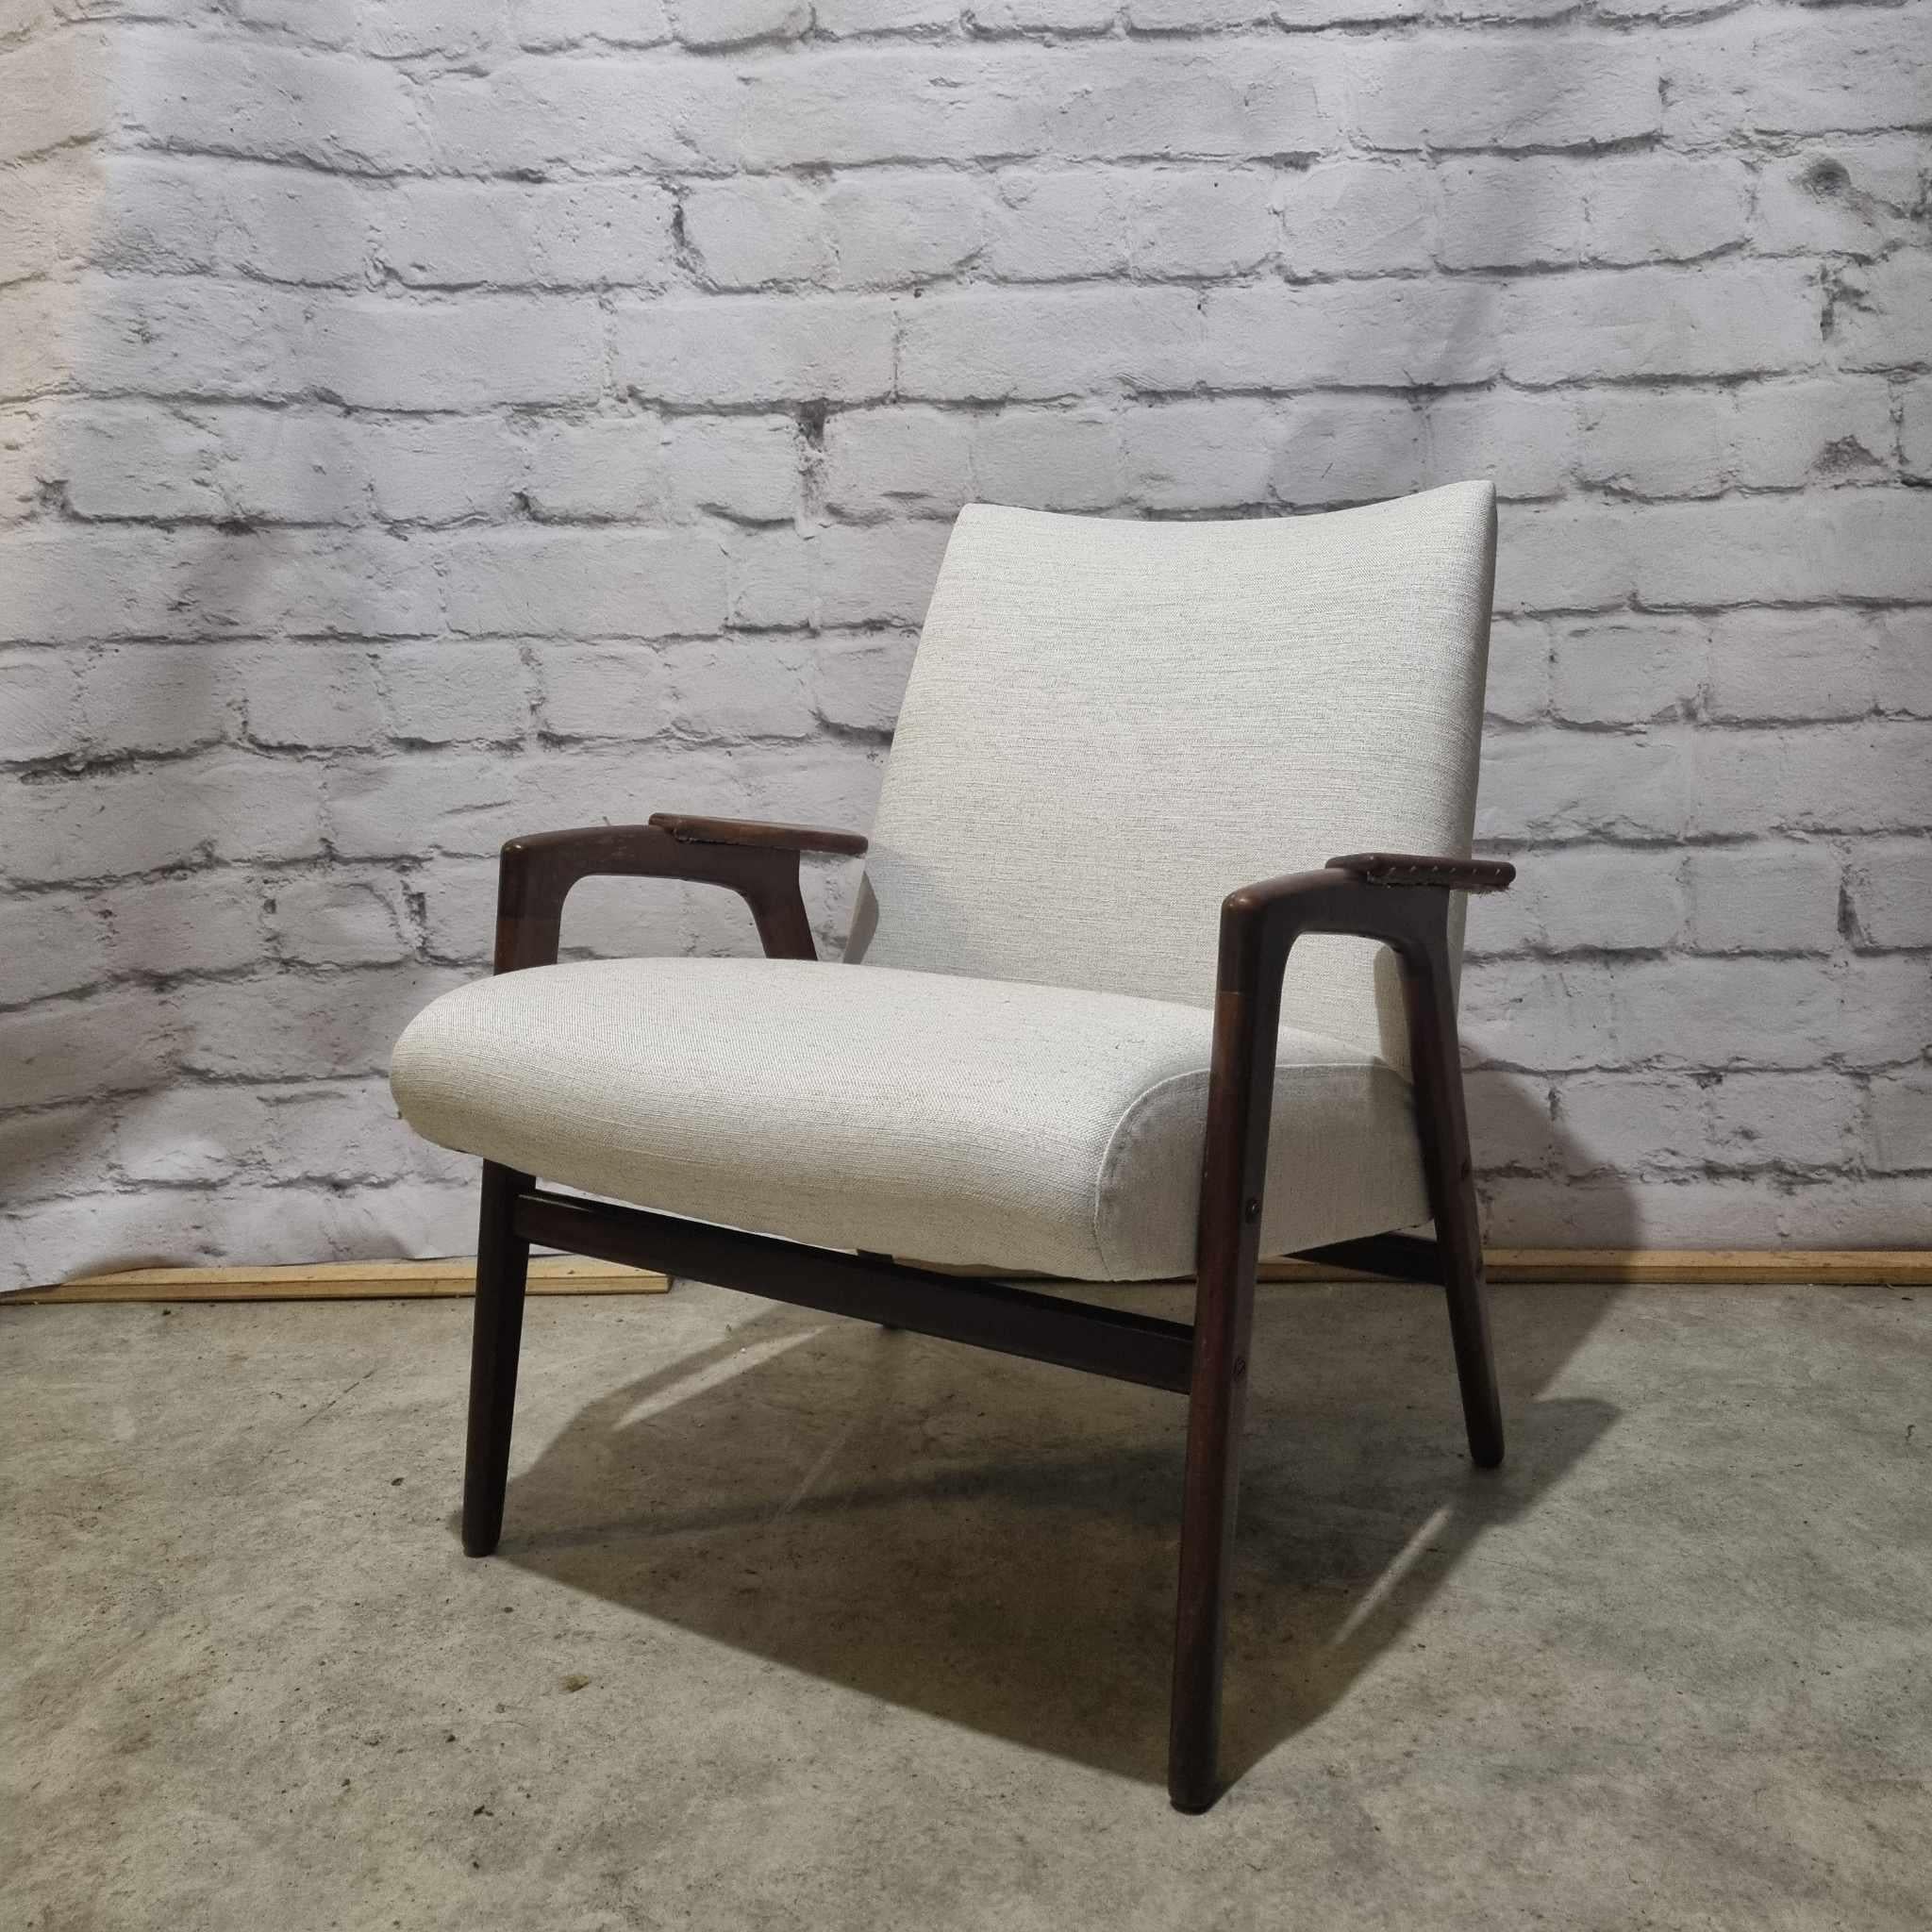 A beautiful and very comfortable Ruster armchair designed by the leading Swedish designer Yngve Ekstrom for Swedese and sold in the Netherlands by the well-known company Pastoe.
The original design of the Ruster armchair was part of the Mingo